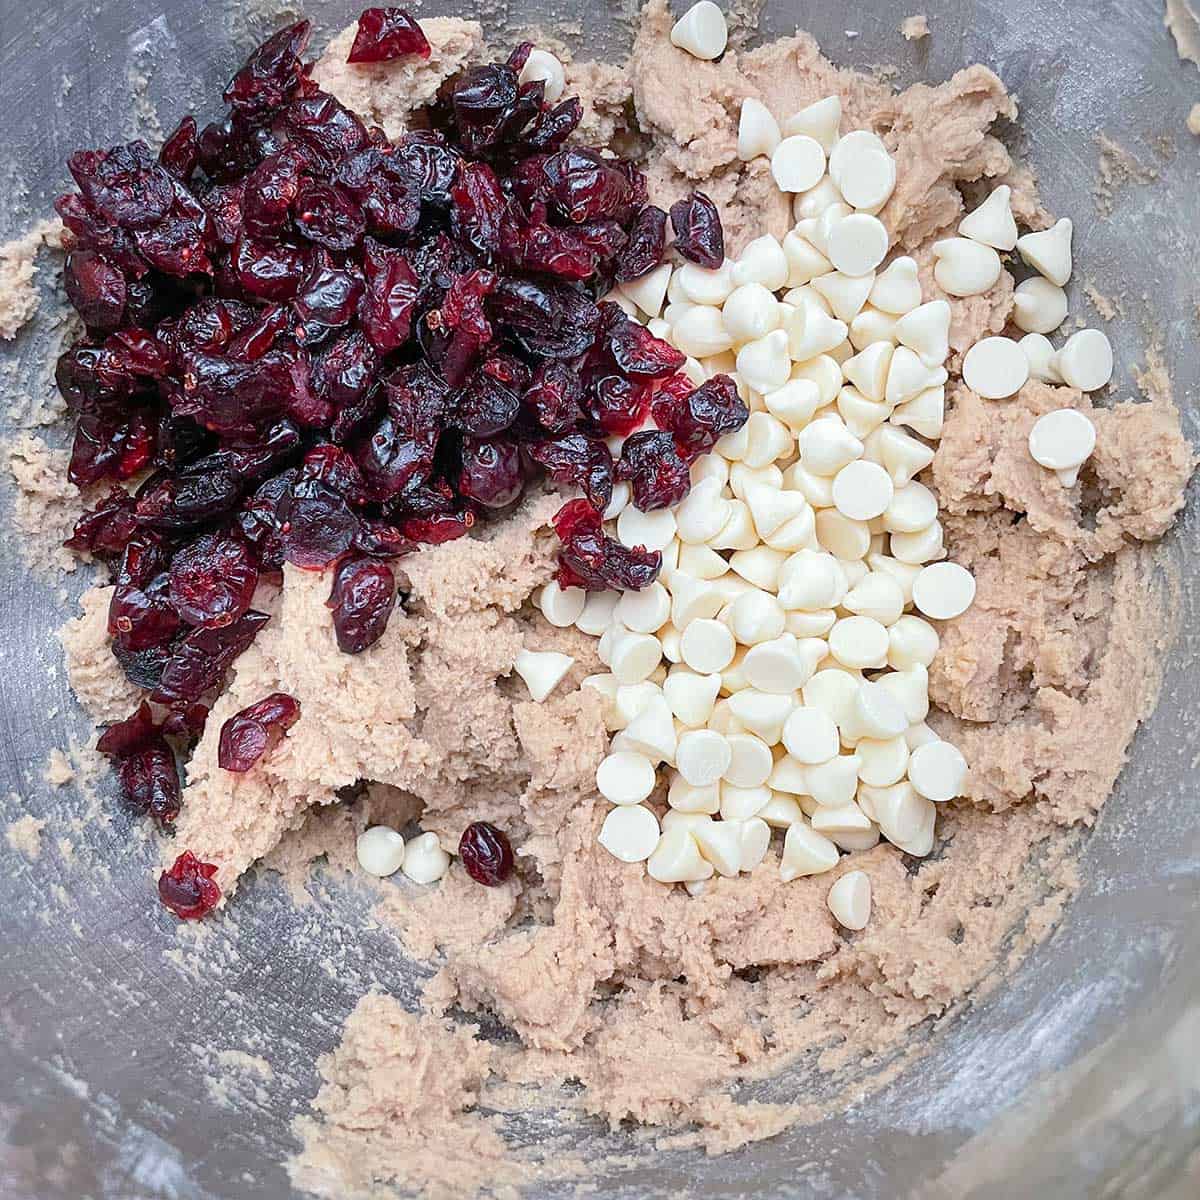 Cookie dough with dried cranberries and white chocolate chips on top, ready to be mixed into the dough.